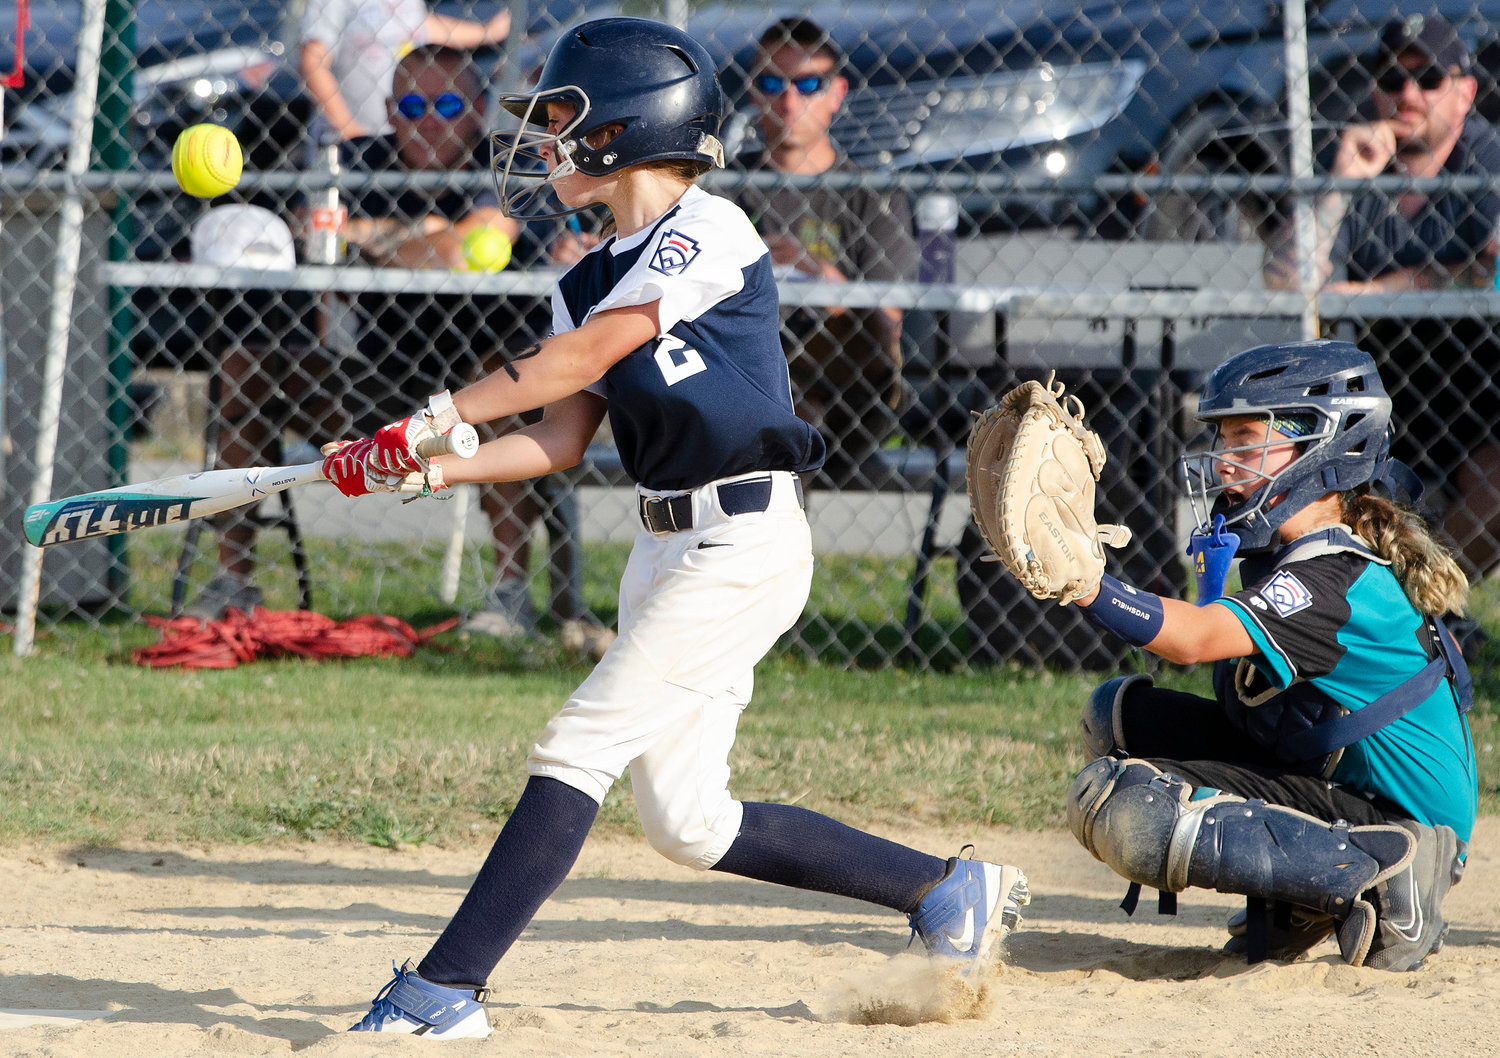 Barrington’s Angie Promades gets her bat on the ball during the game against Cranston Western.